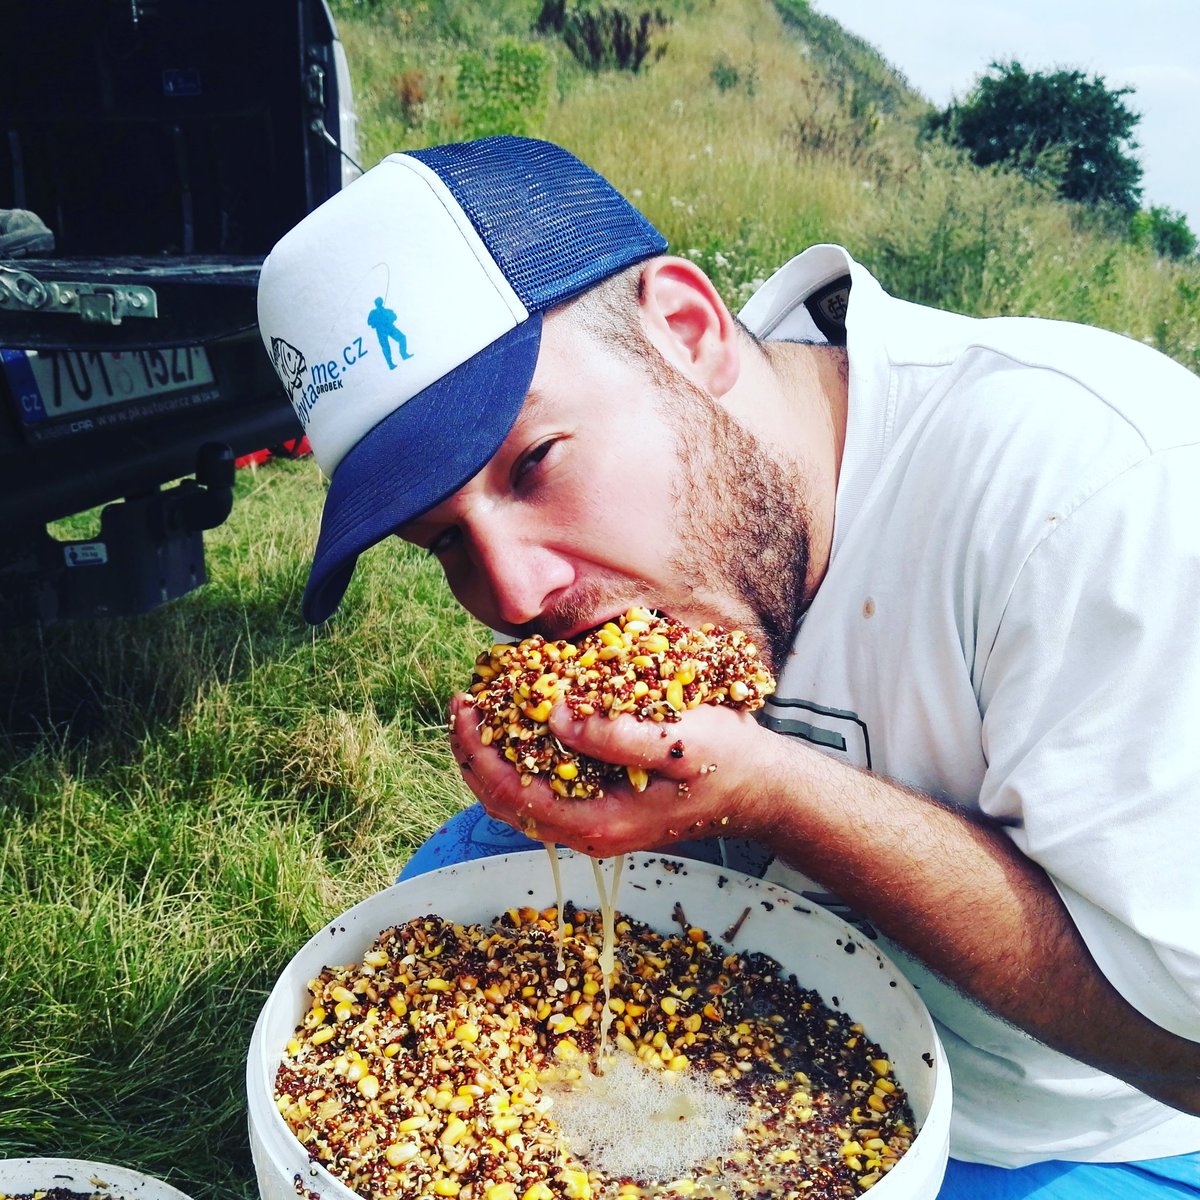 Drobek is <b>Hungry</b>. #haha #carpfishing #with #zachytame #team :) https://t.co/Uulzqf7Y4D